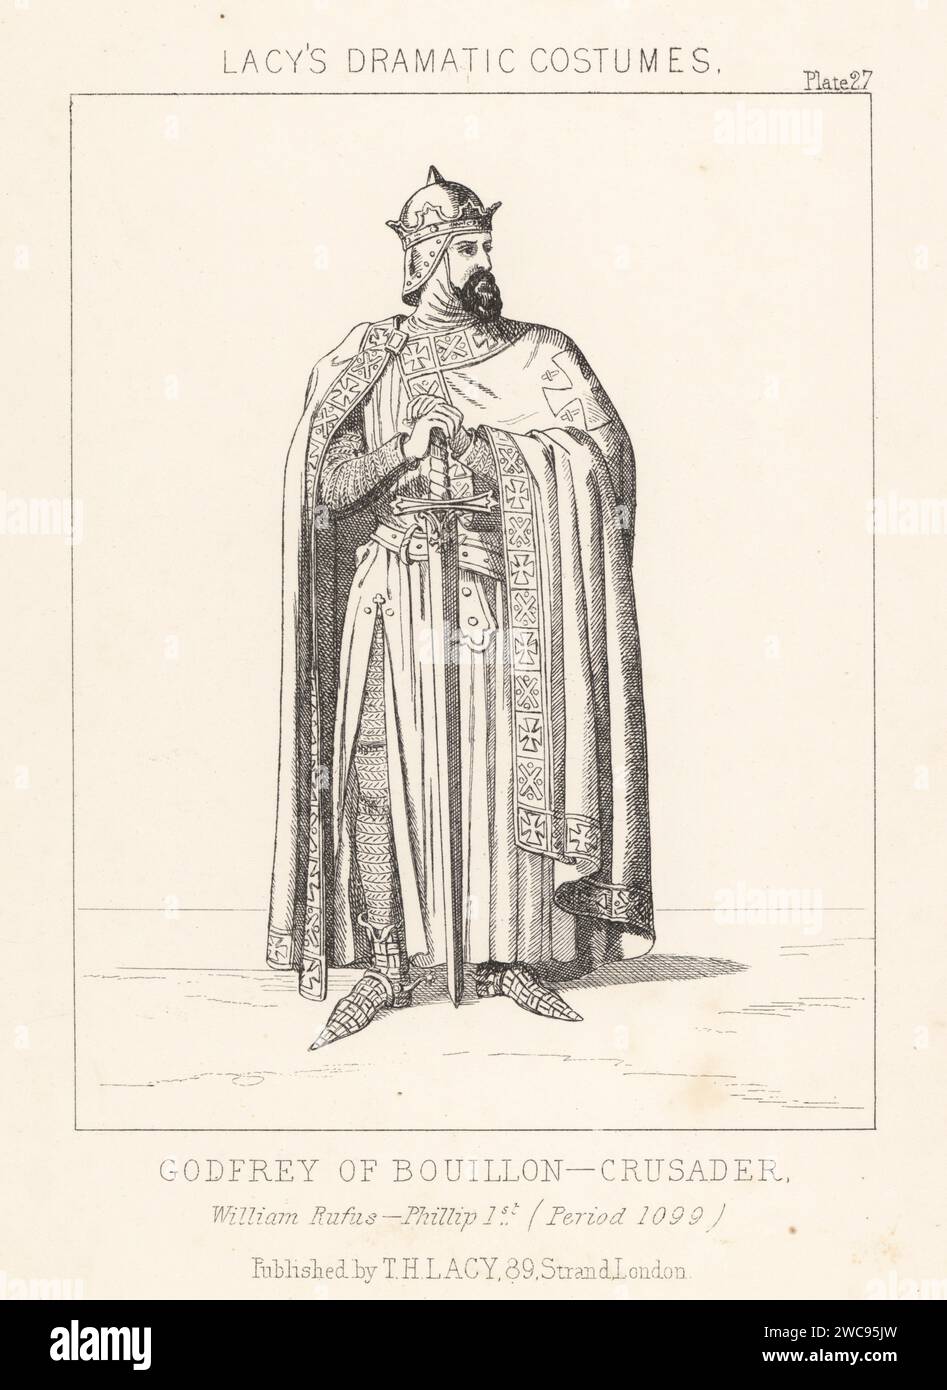 Godfrey of Bouillon, leader of the First Crusade, c.1060-1100. First ruler of Jerusalem. Reign of William Rufus, Phillip I. In helmet with crown, cloak with embroidered cross, tunic, chainmail hauberk, with sword. Lithograph from Thomas Hailes Lacy's Male Costumes, Historical, National and Dramatic in 200 Plates, London, 1865. Lacy (1809-1873) was a British actor, playwright, theatrical manager and publisher. Stock Photo